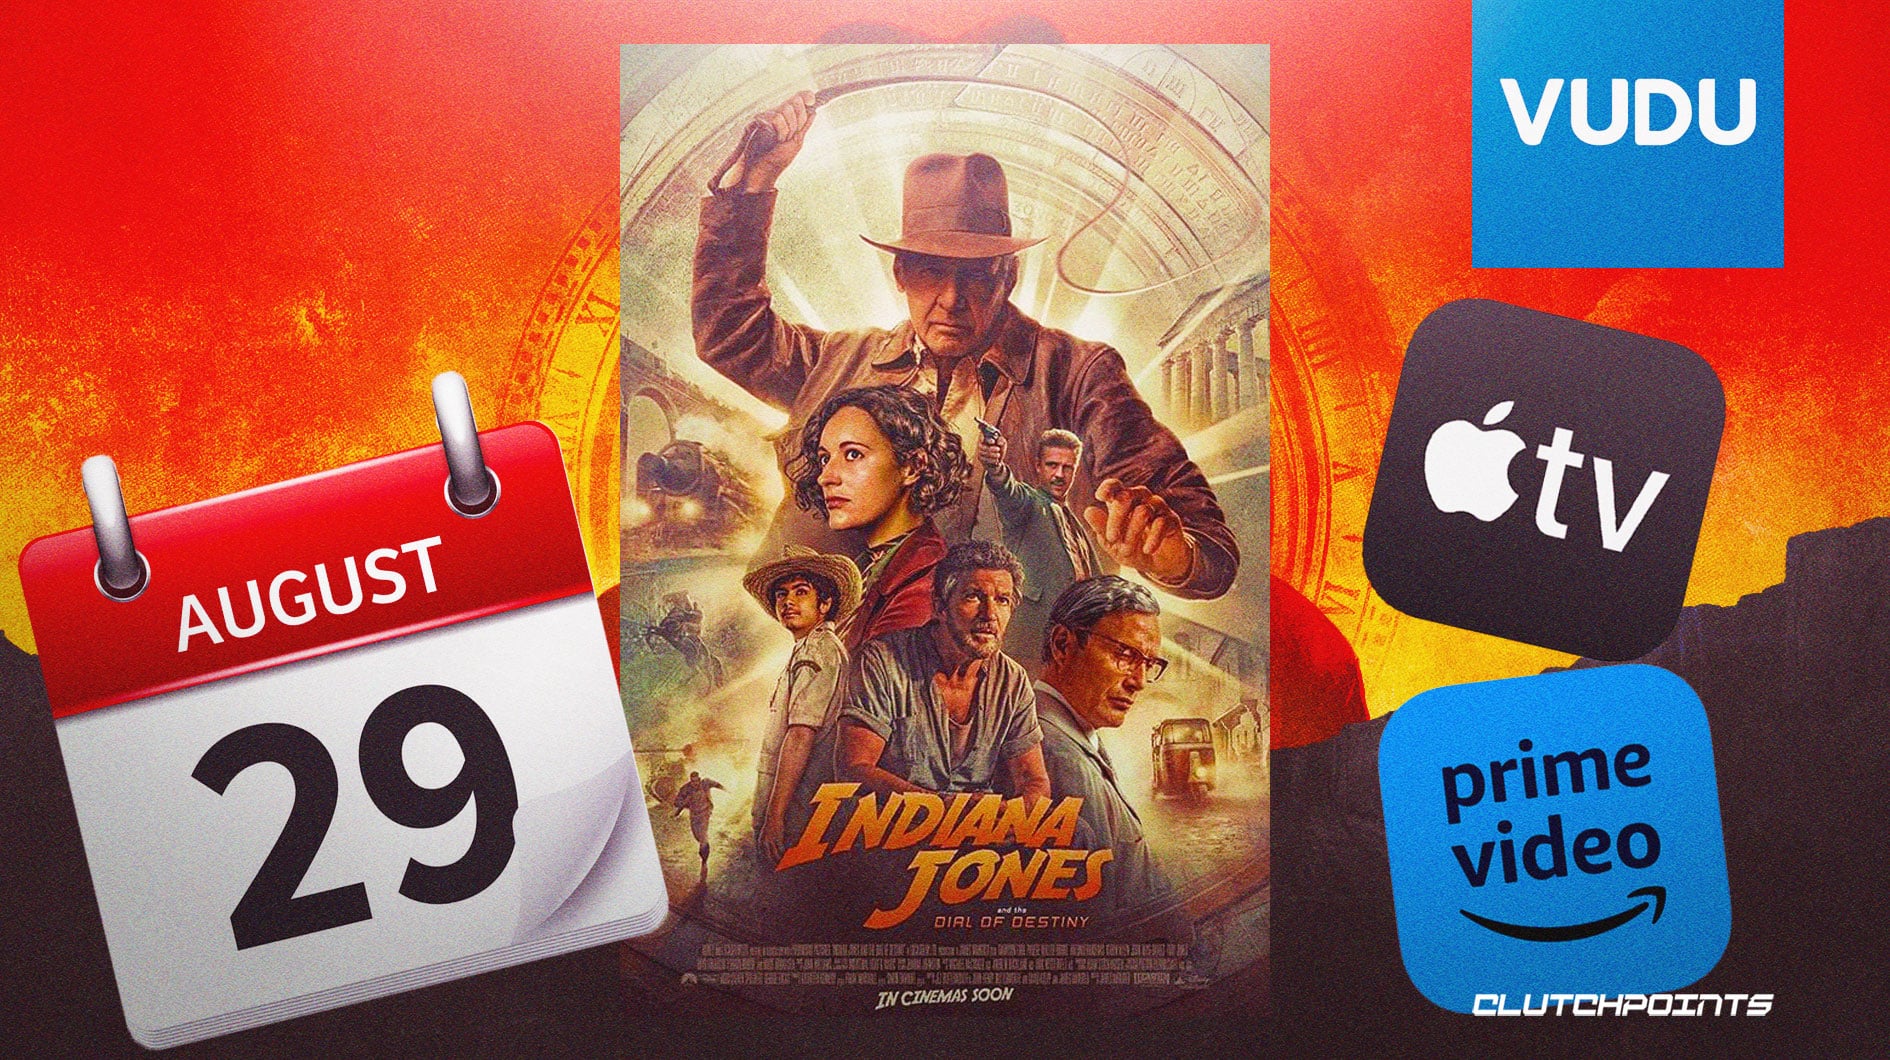 Indiana Jones 5 to be released on VOD on August 29